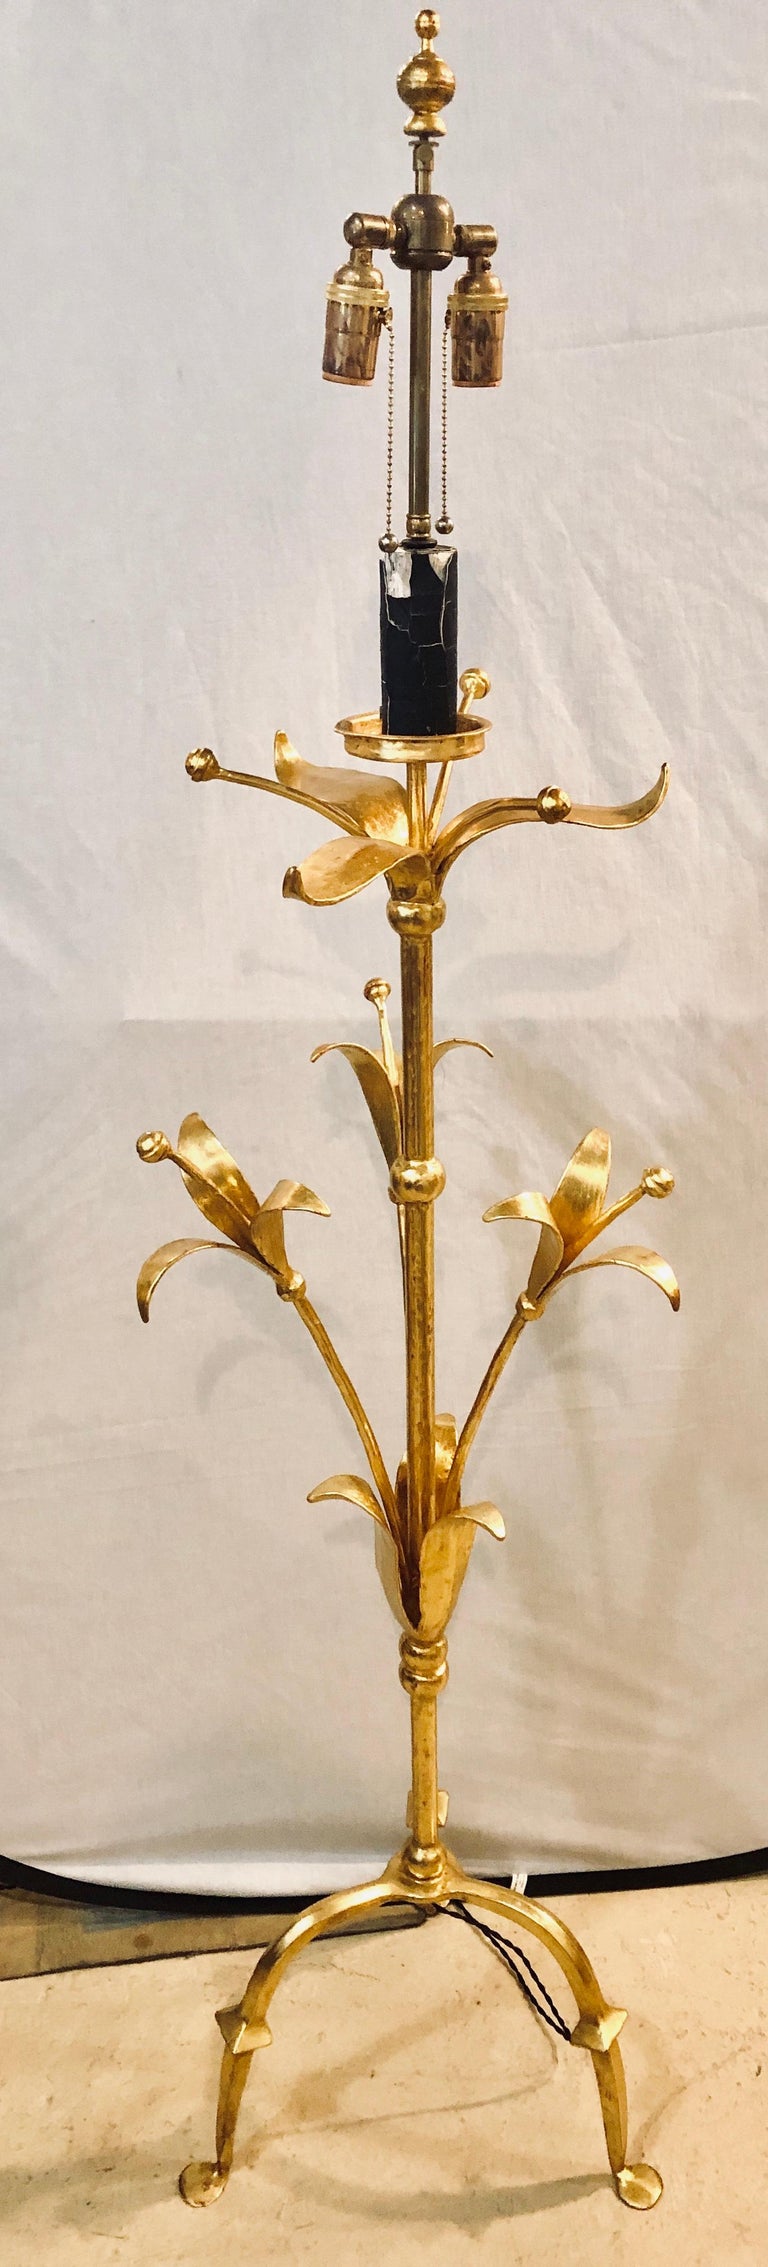 Hollywood Regency Tulip Form Solid Bronze Floor Standing or Tall Lamp ...